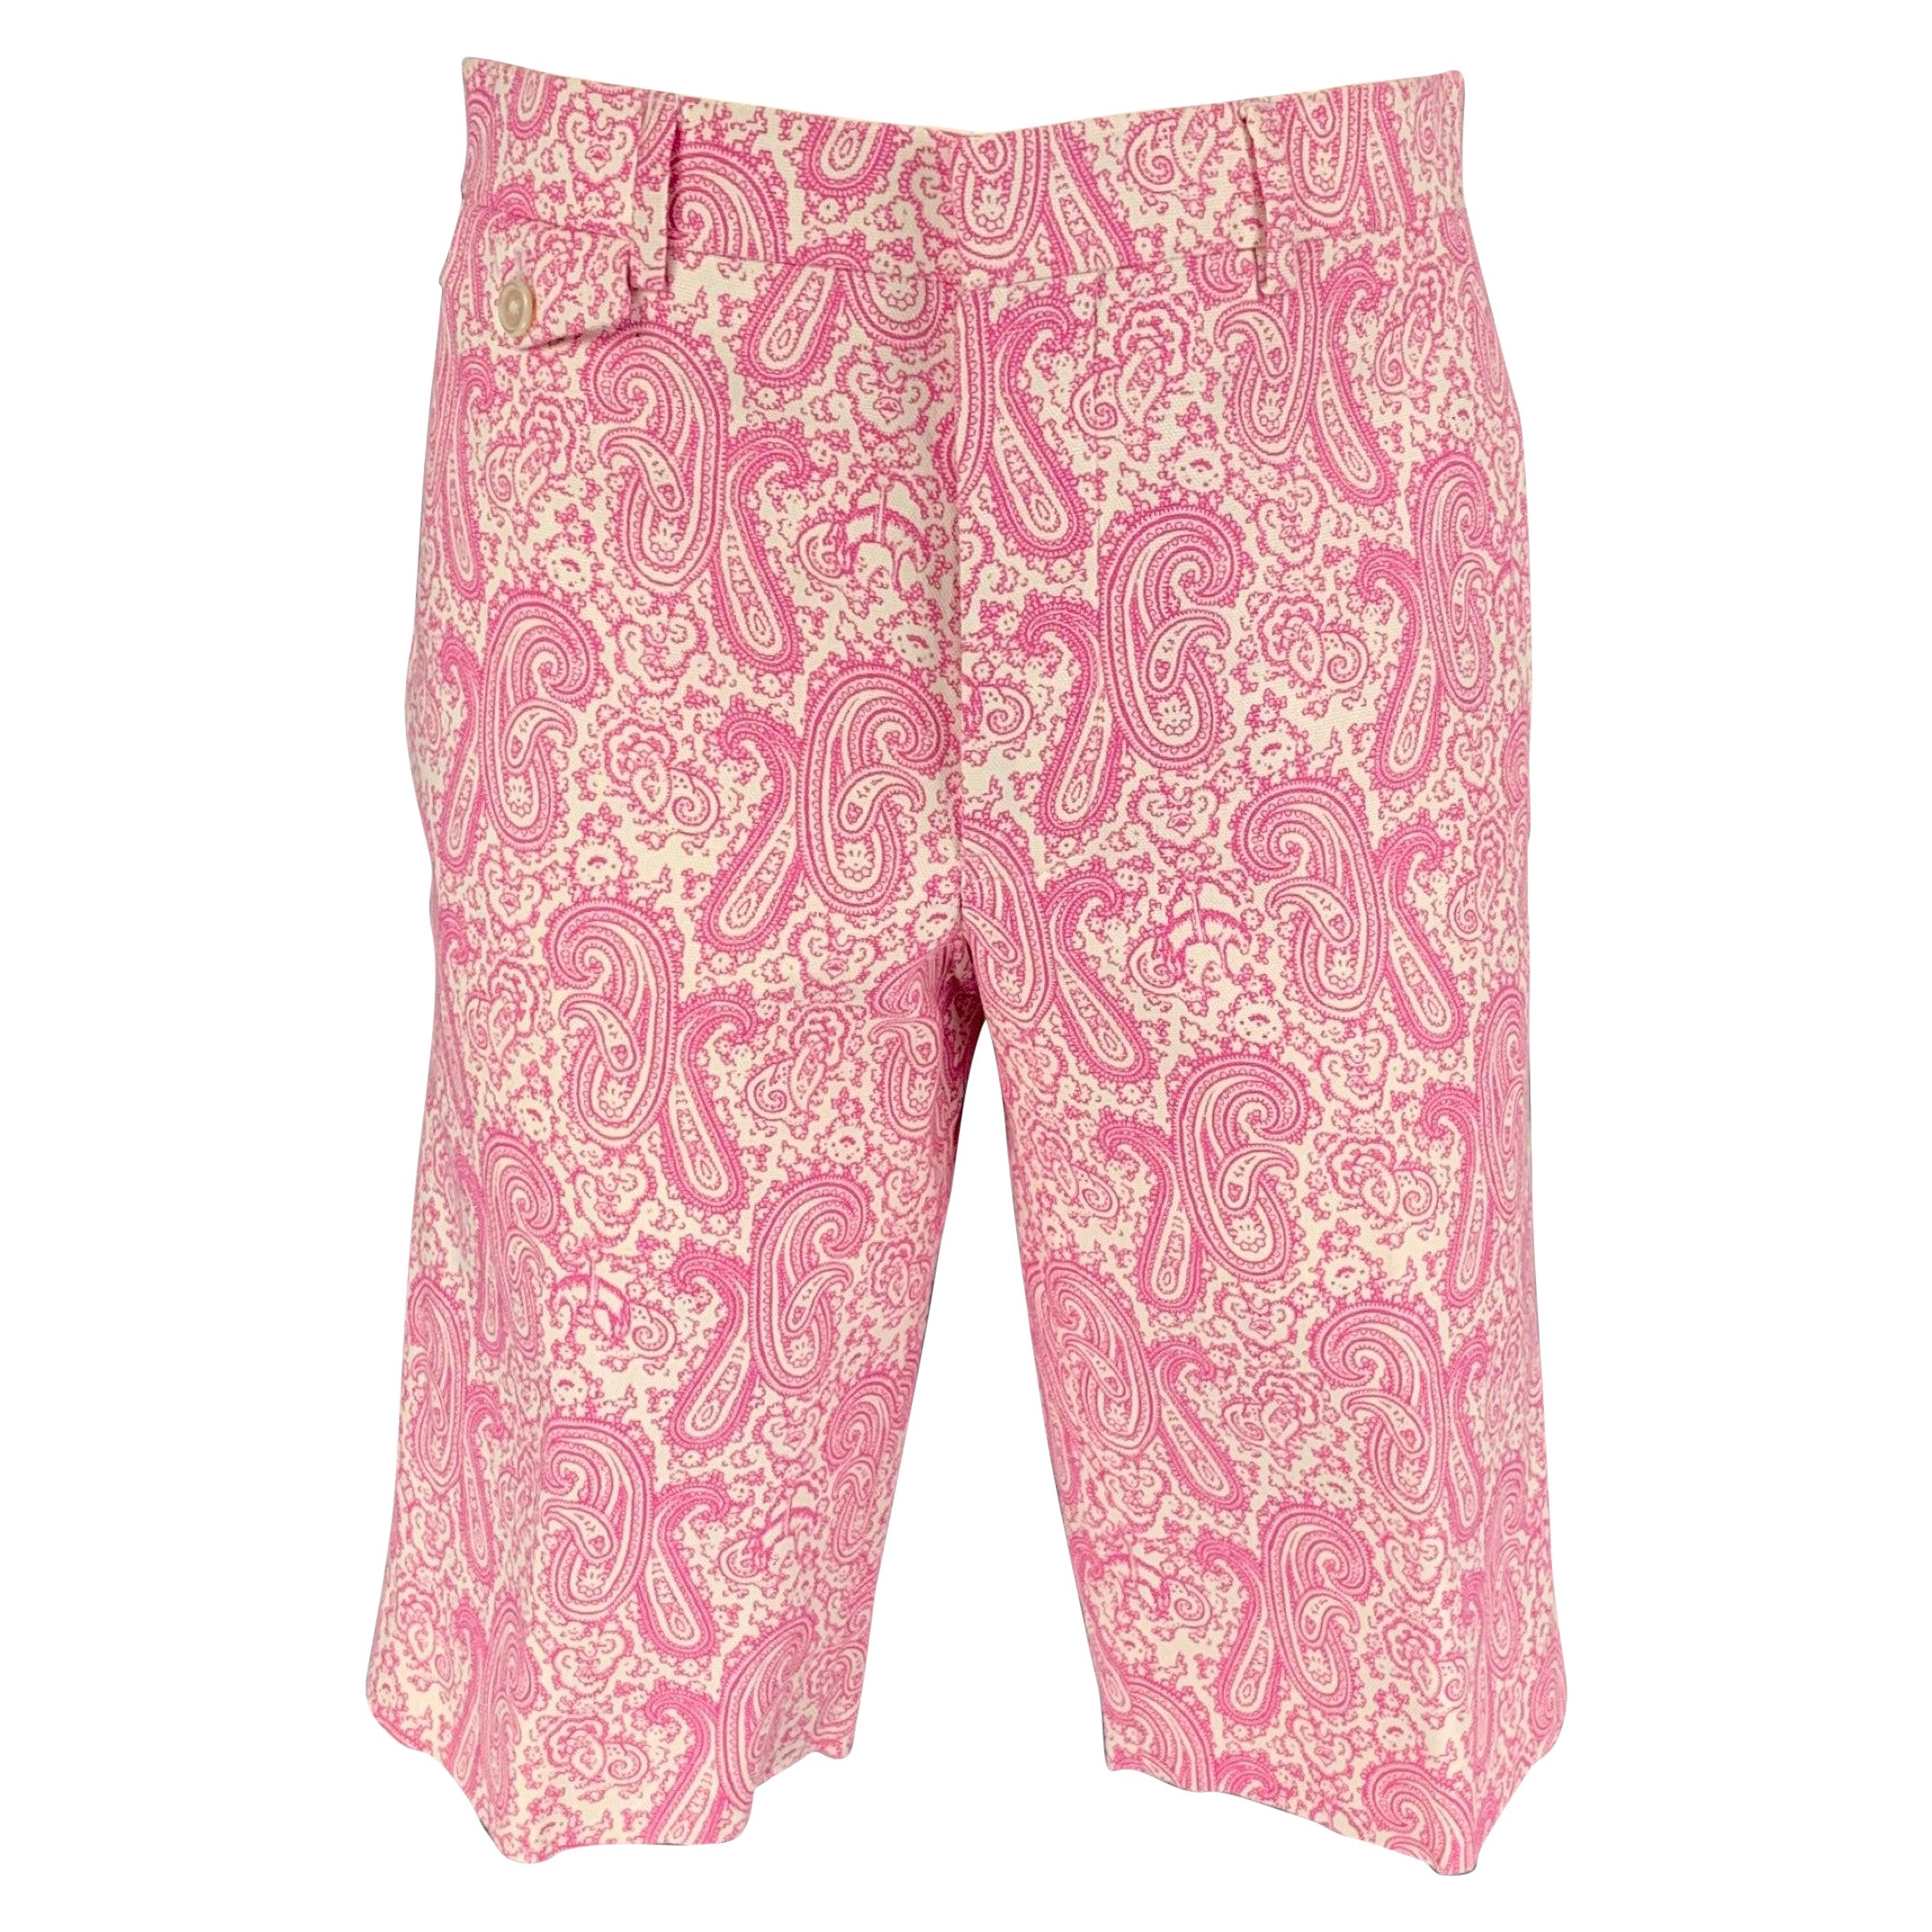 BLACK FLEECE Size 28 Pink White Paisley Cotton Zip Fly Shorts For Sale